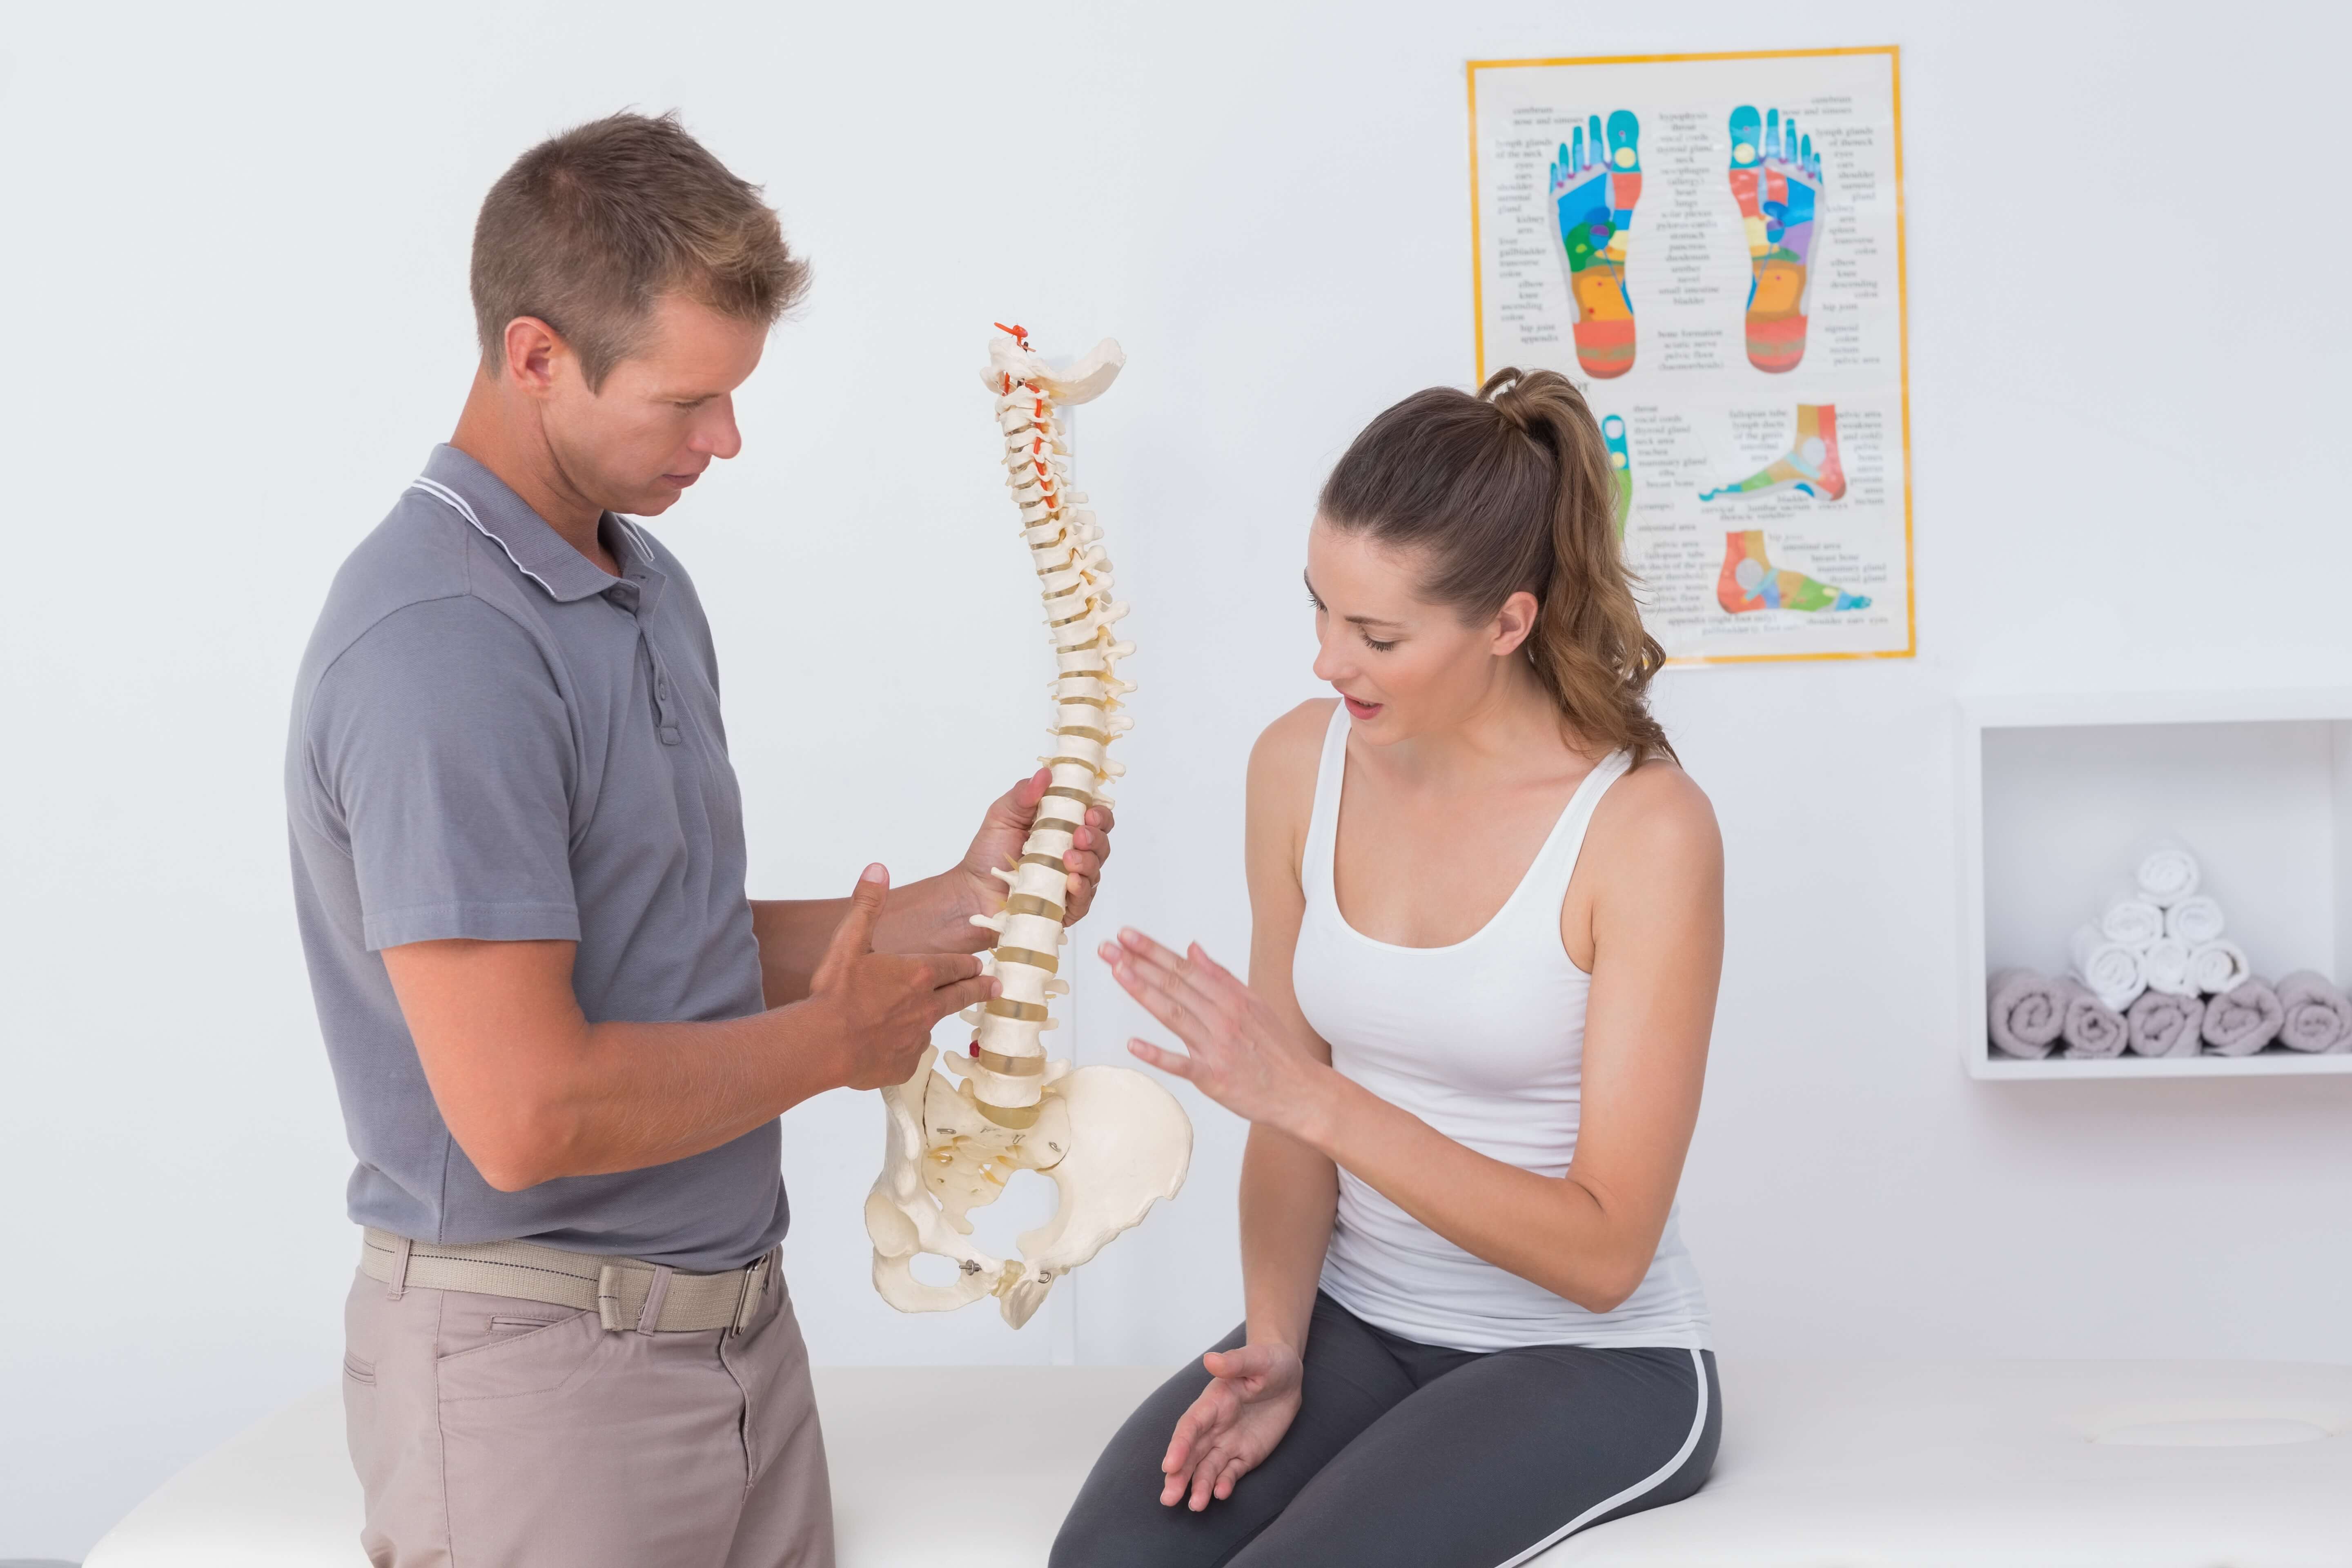 A herniated disc may be causing your back pain